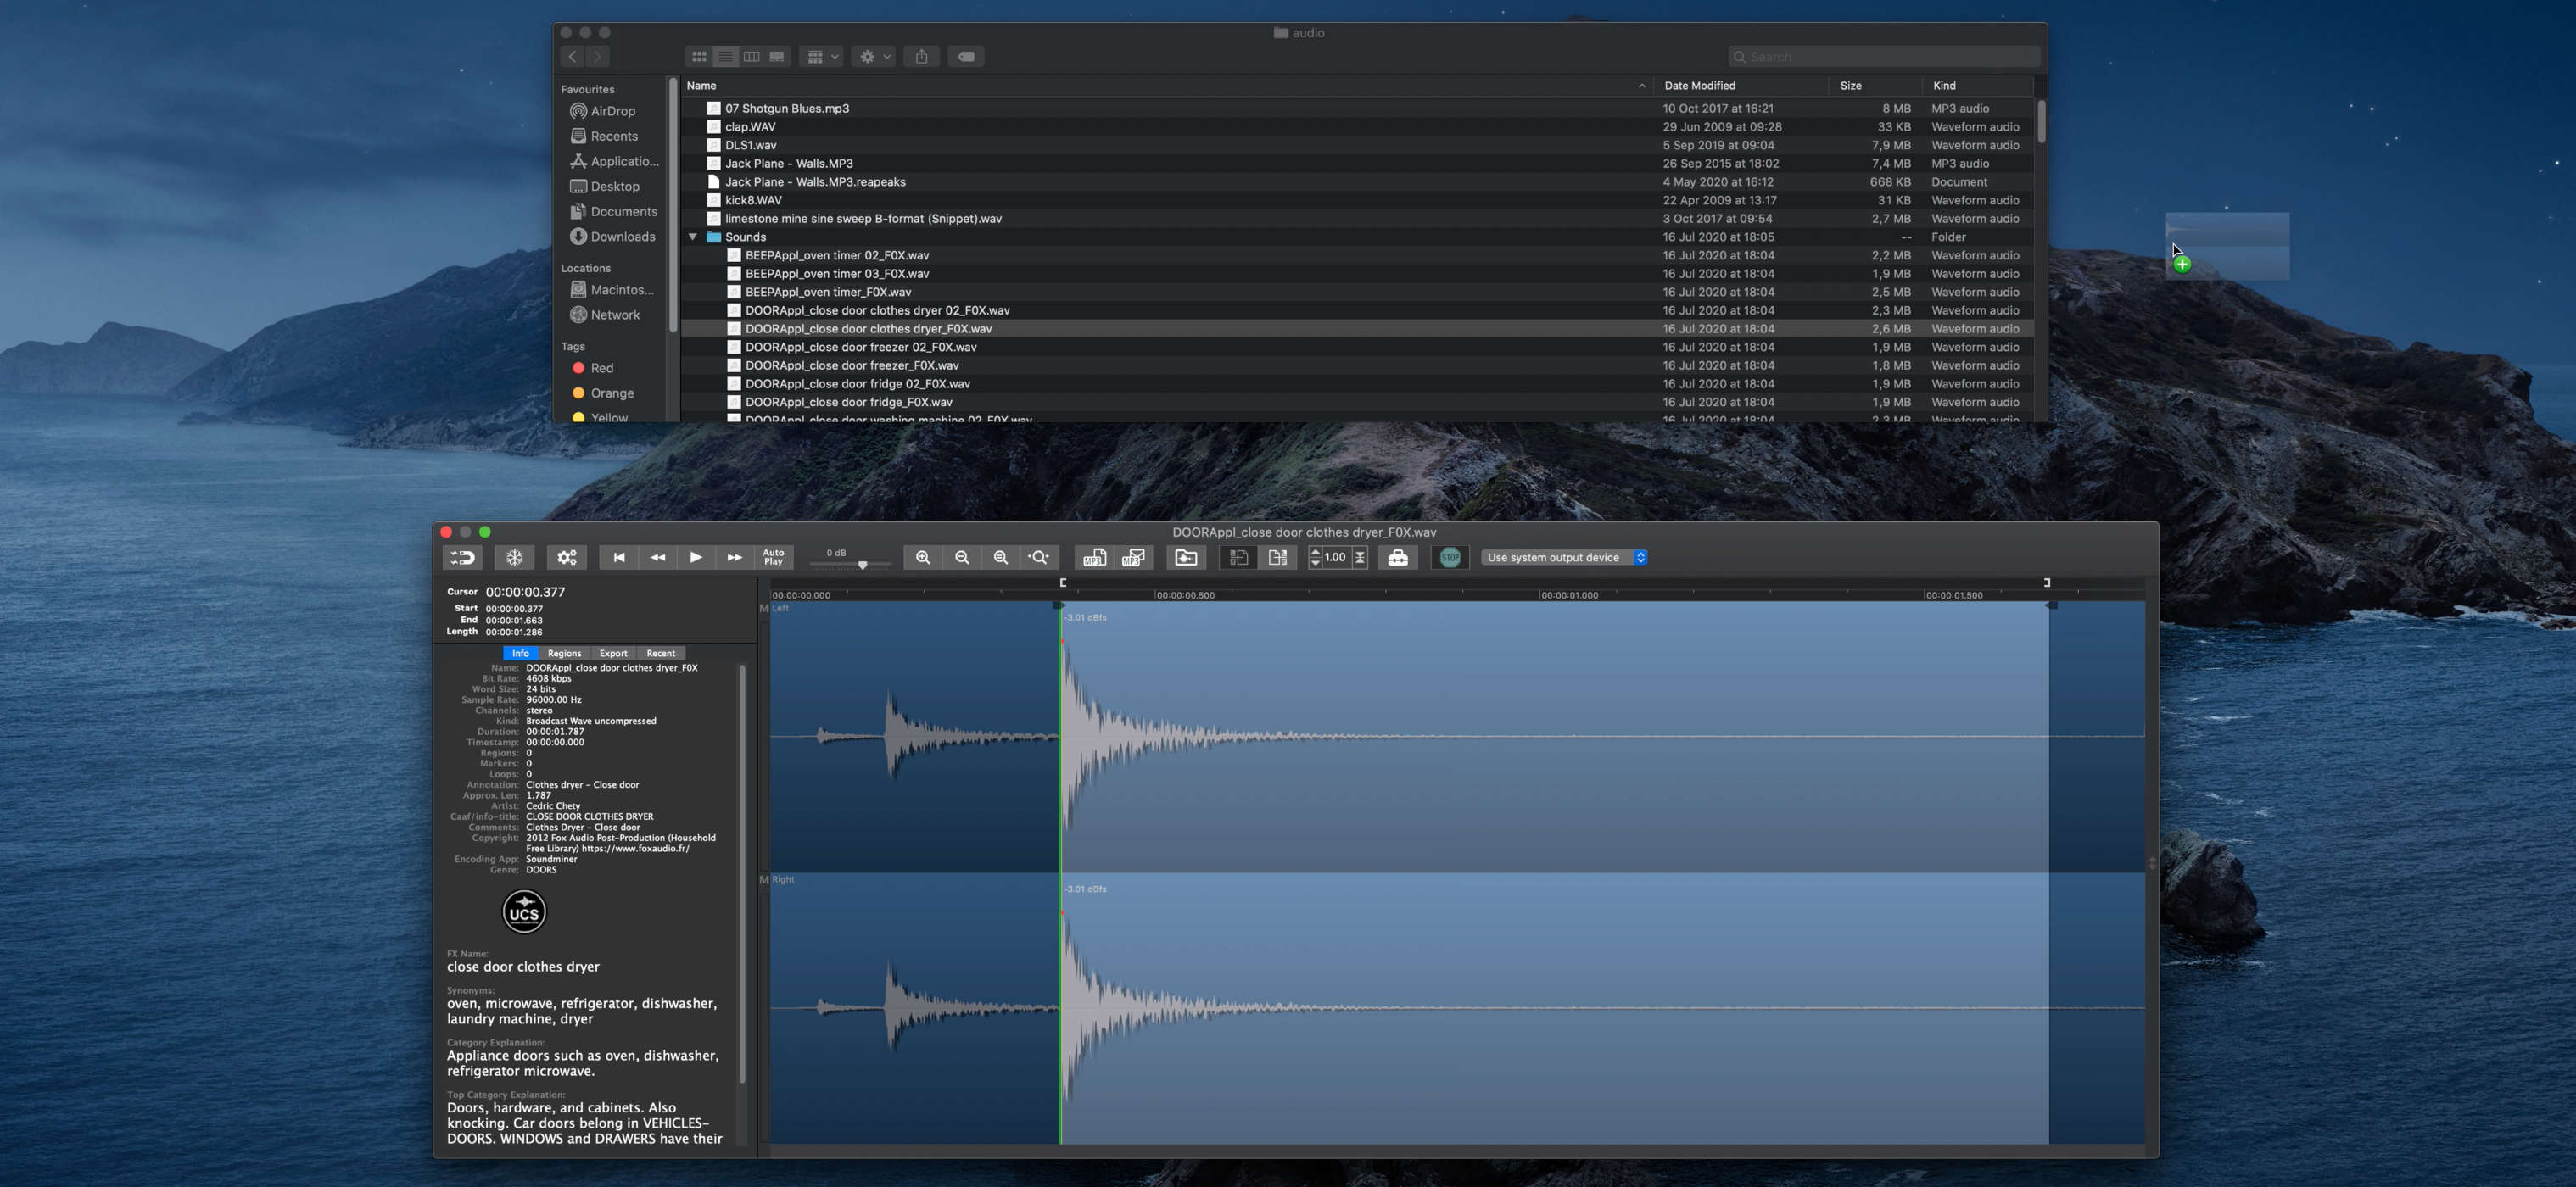 Snapper, view and edit audio file right in the Mac Finder